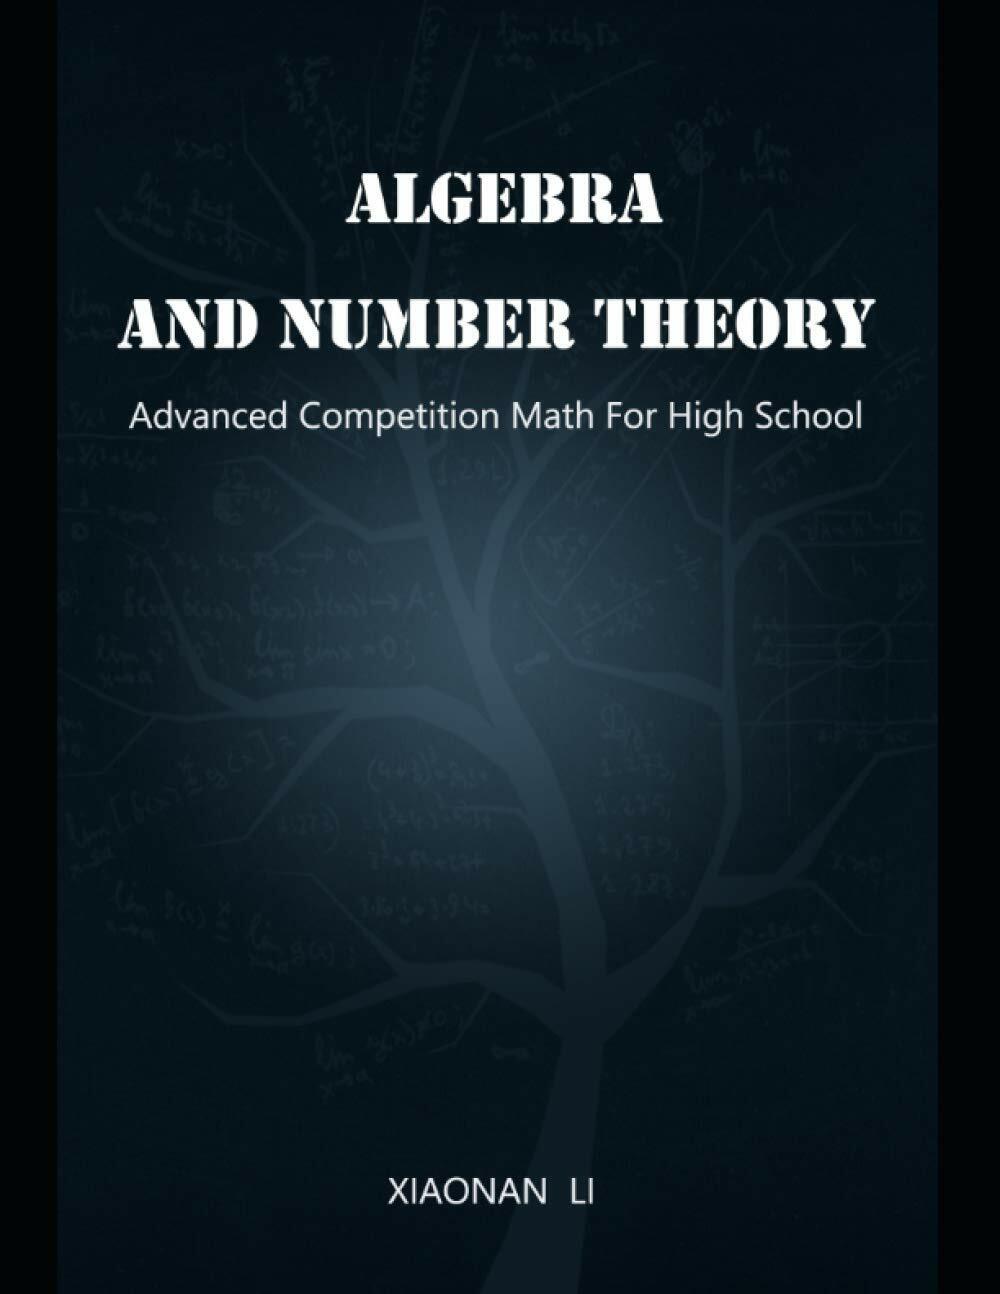 Advanced Math Competition for High School: Algebra and Number Theory (Paperback)